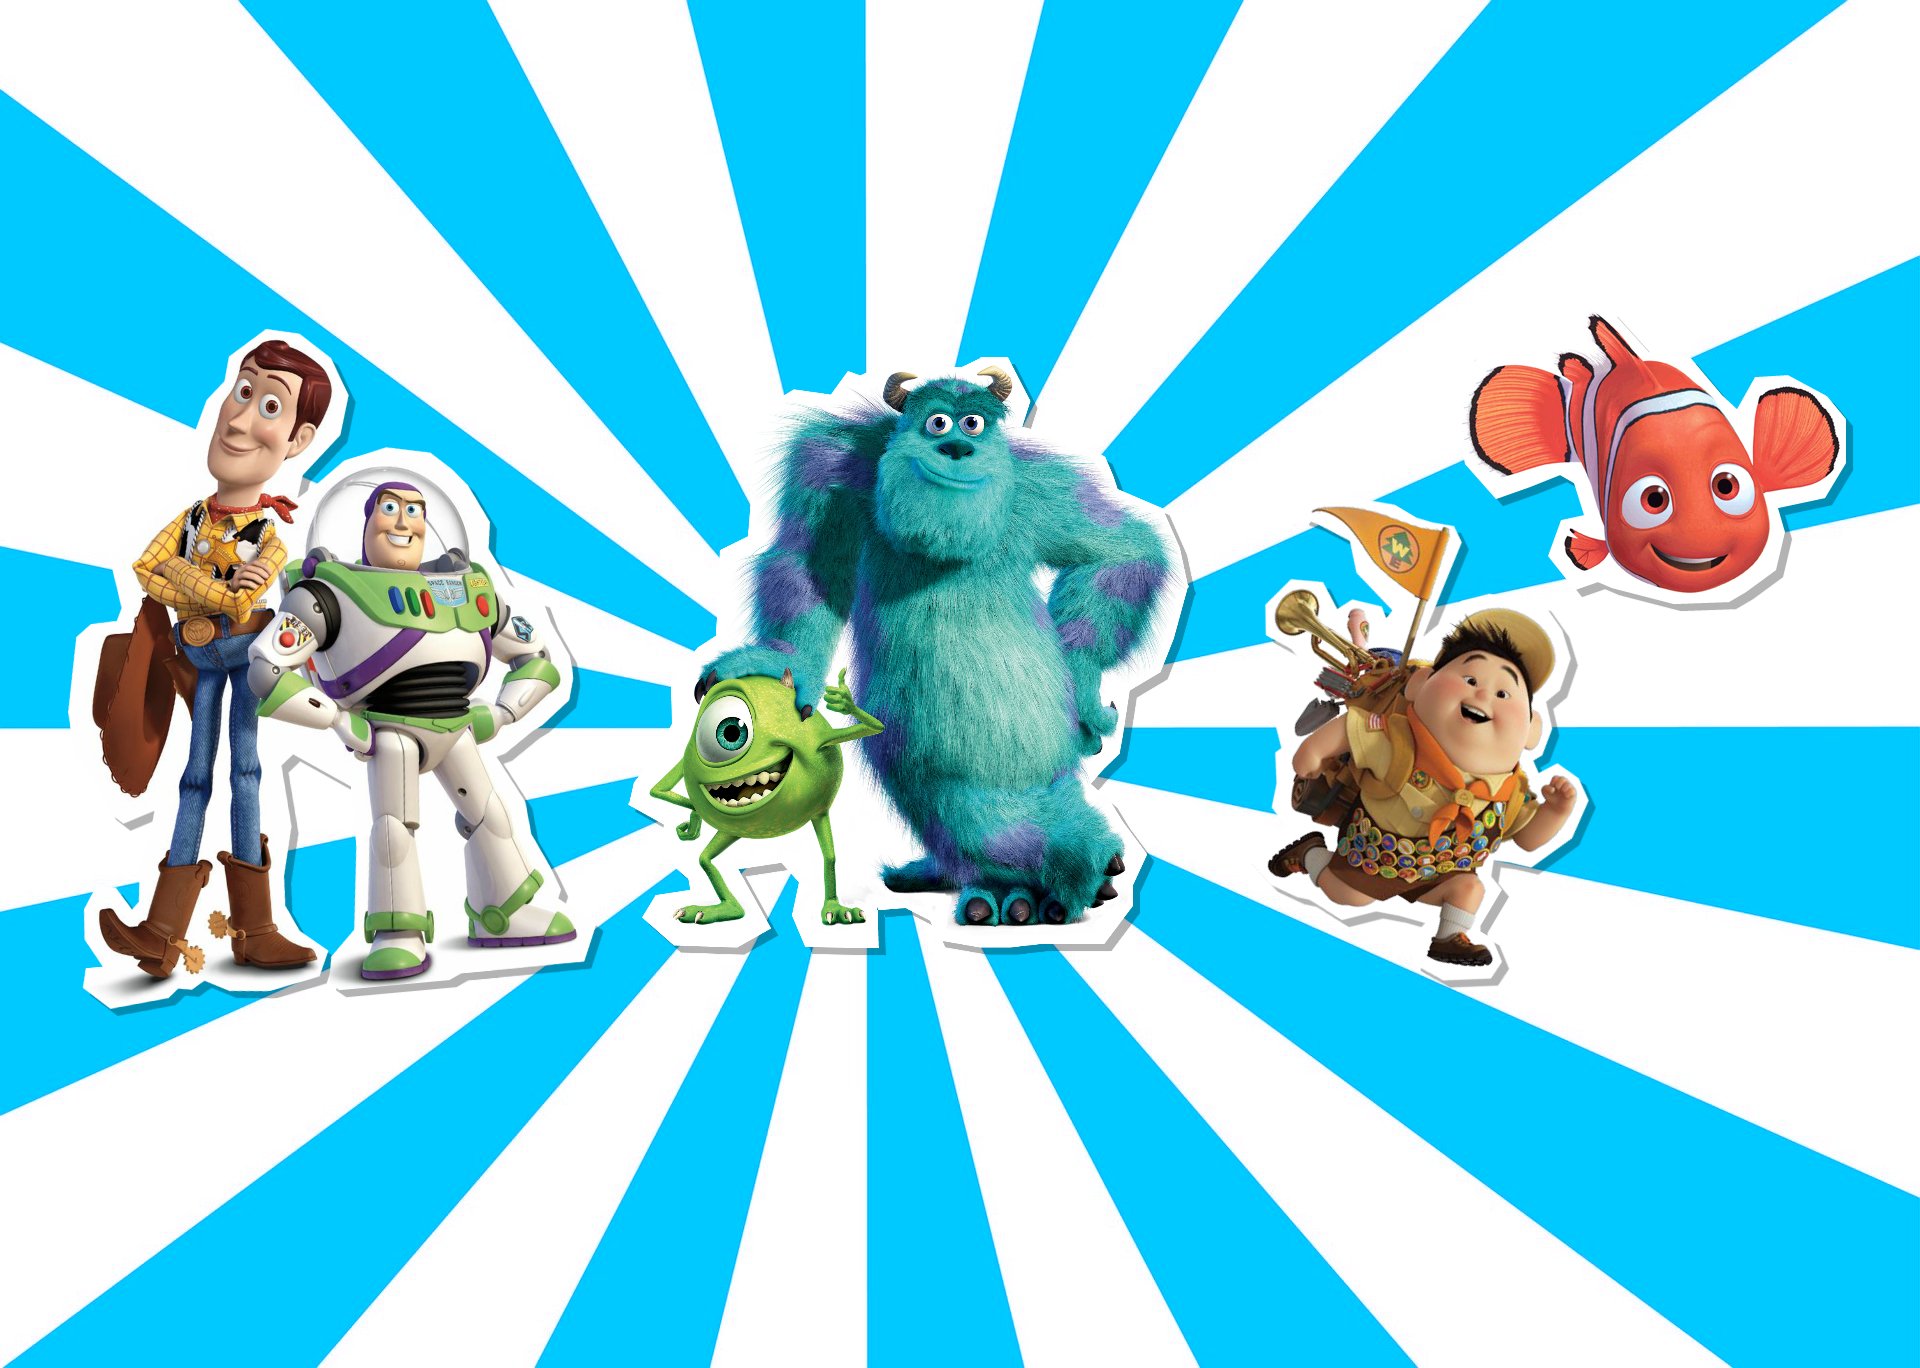 Pixar films Toy Story Monsters Inc Finding Nemo and Up